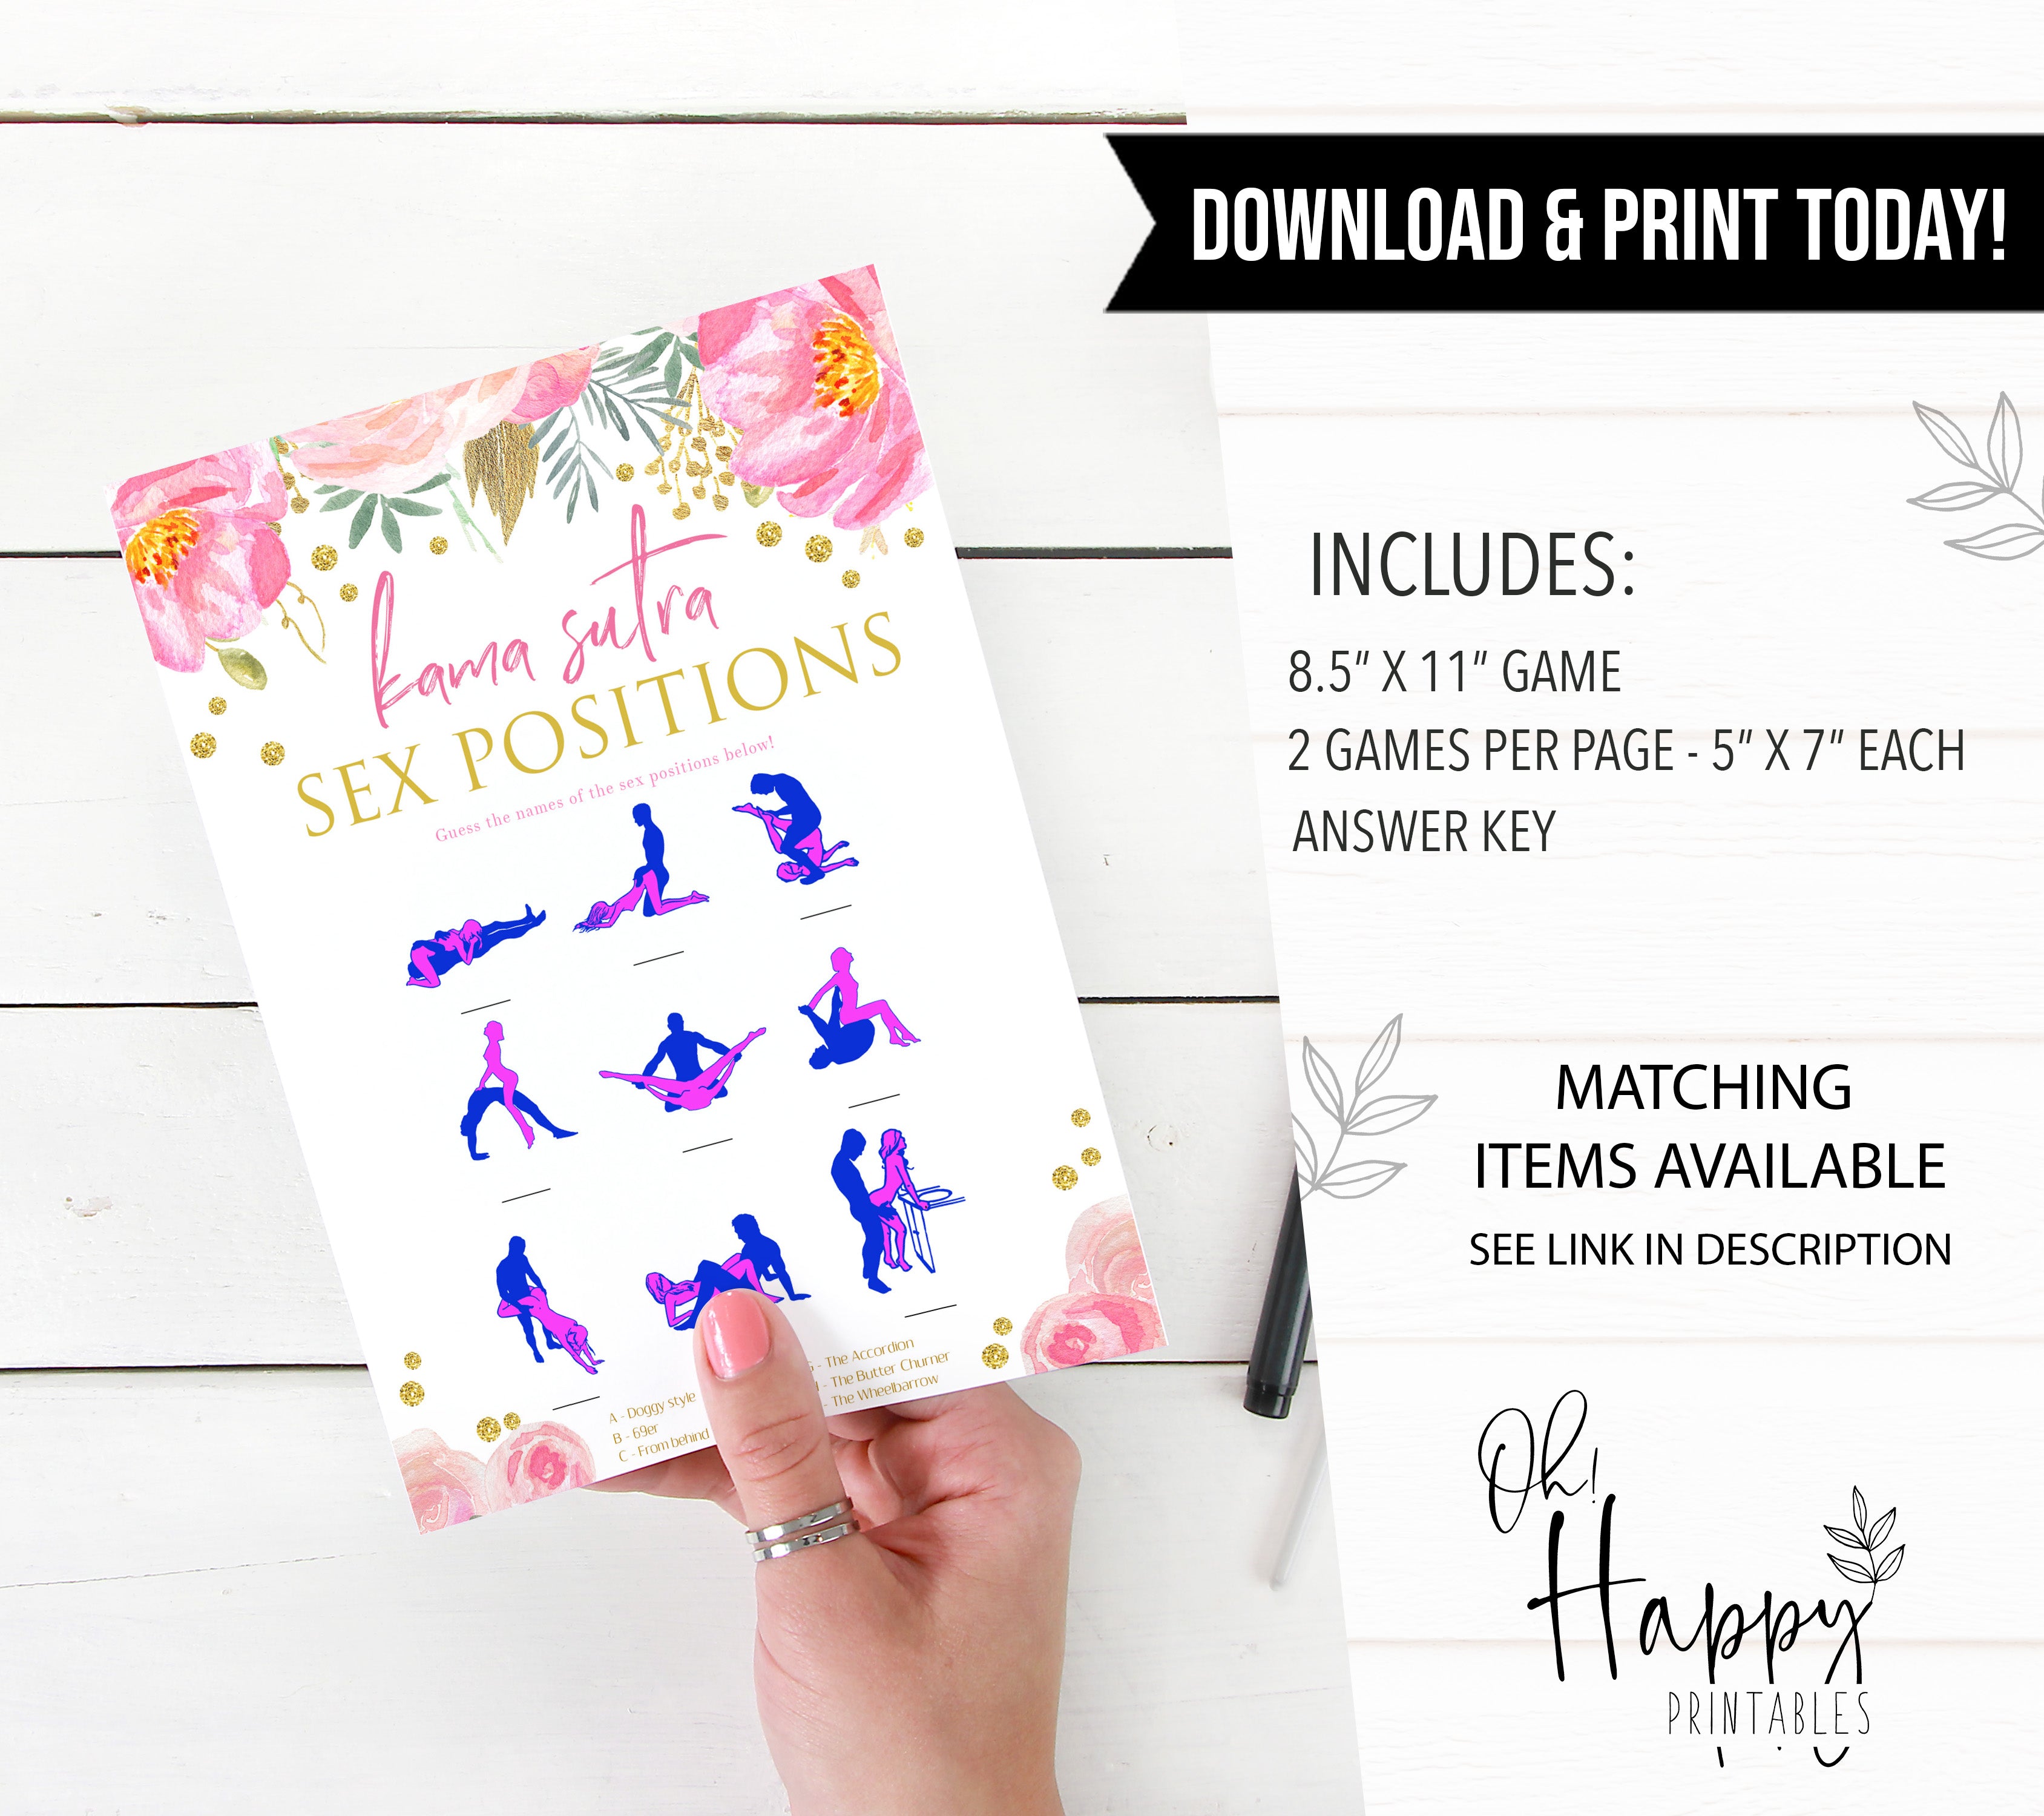 sex positions game, printable bridal shower games, blush floral bridal shower games, fun bridal shower games